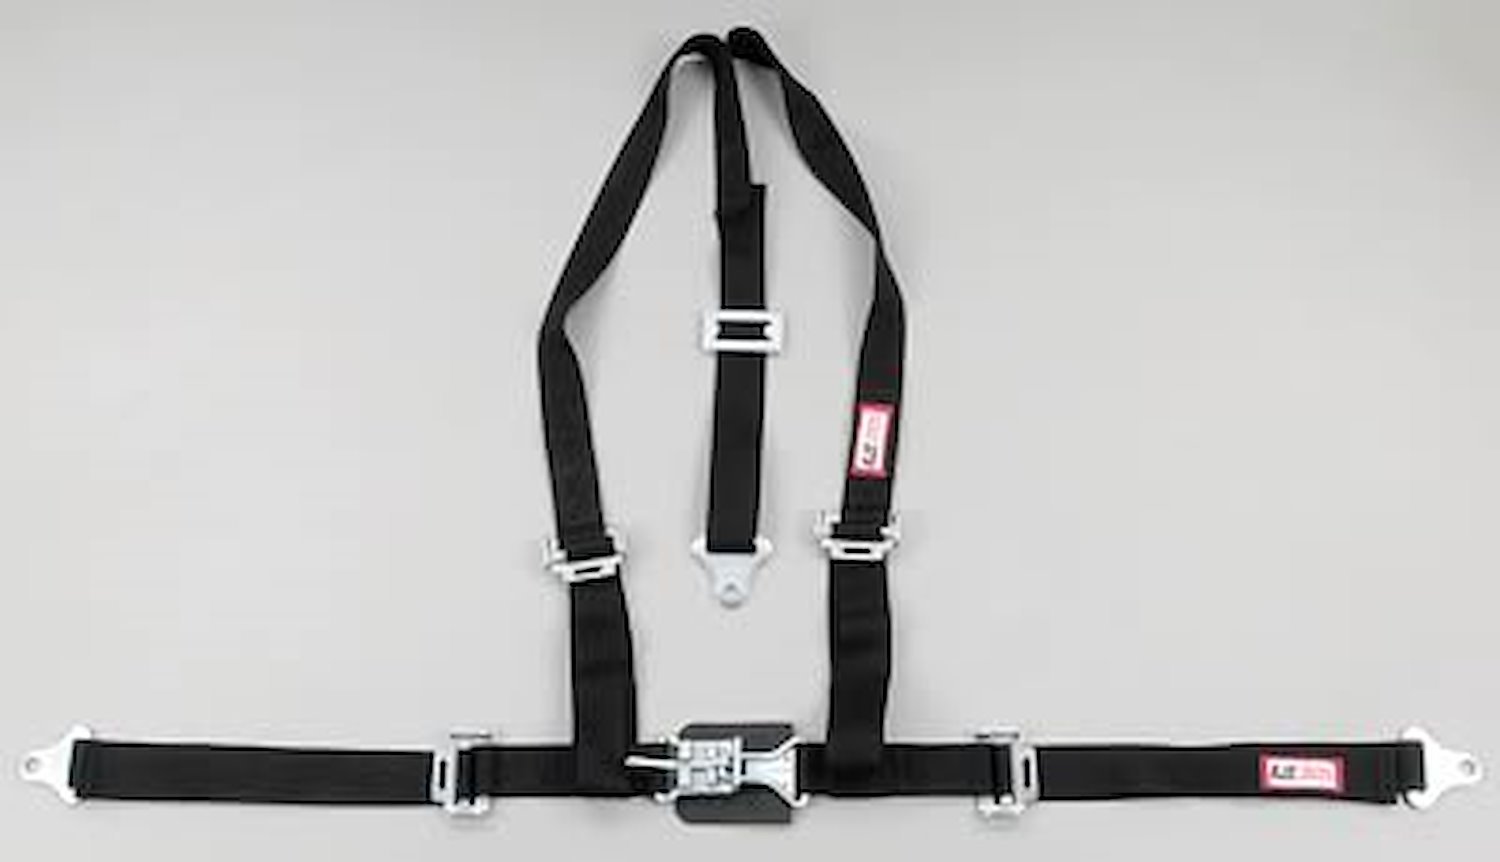 NON-SFI L&L HARNESS 3 PULL DOWN Lap Belt w/adjuster SNAP 2 S.H. Y FLOOR Mount w/STERNUM STRAP WRAP/BOLT RED